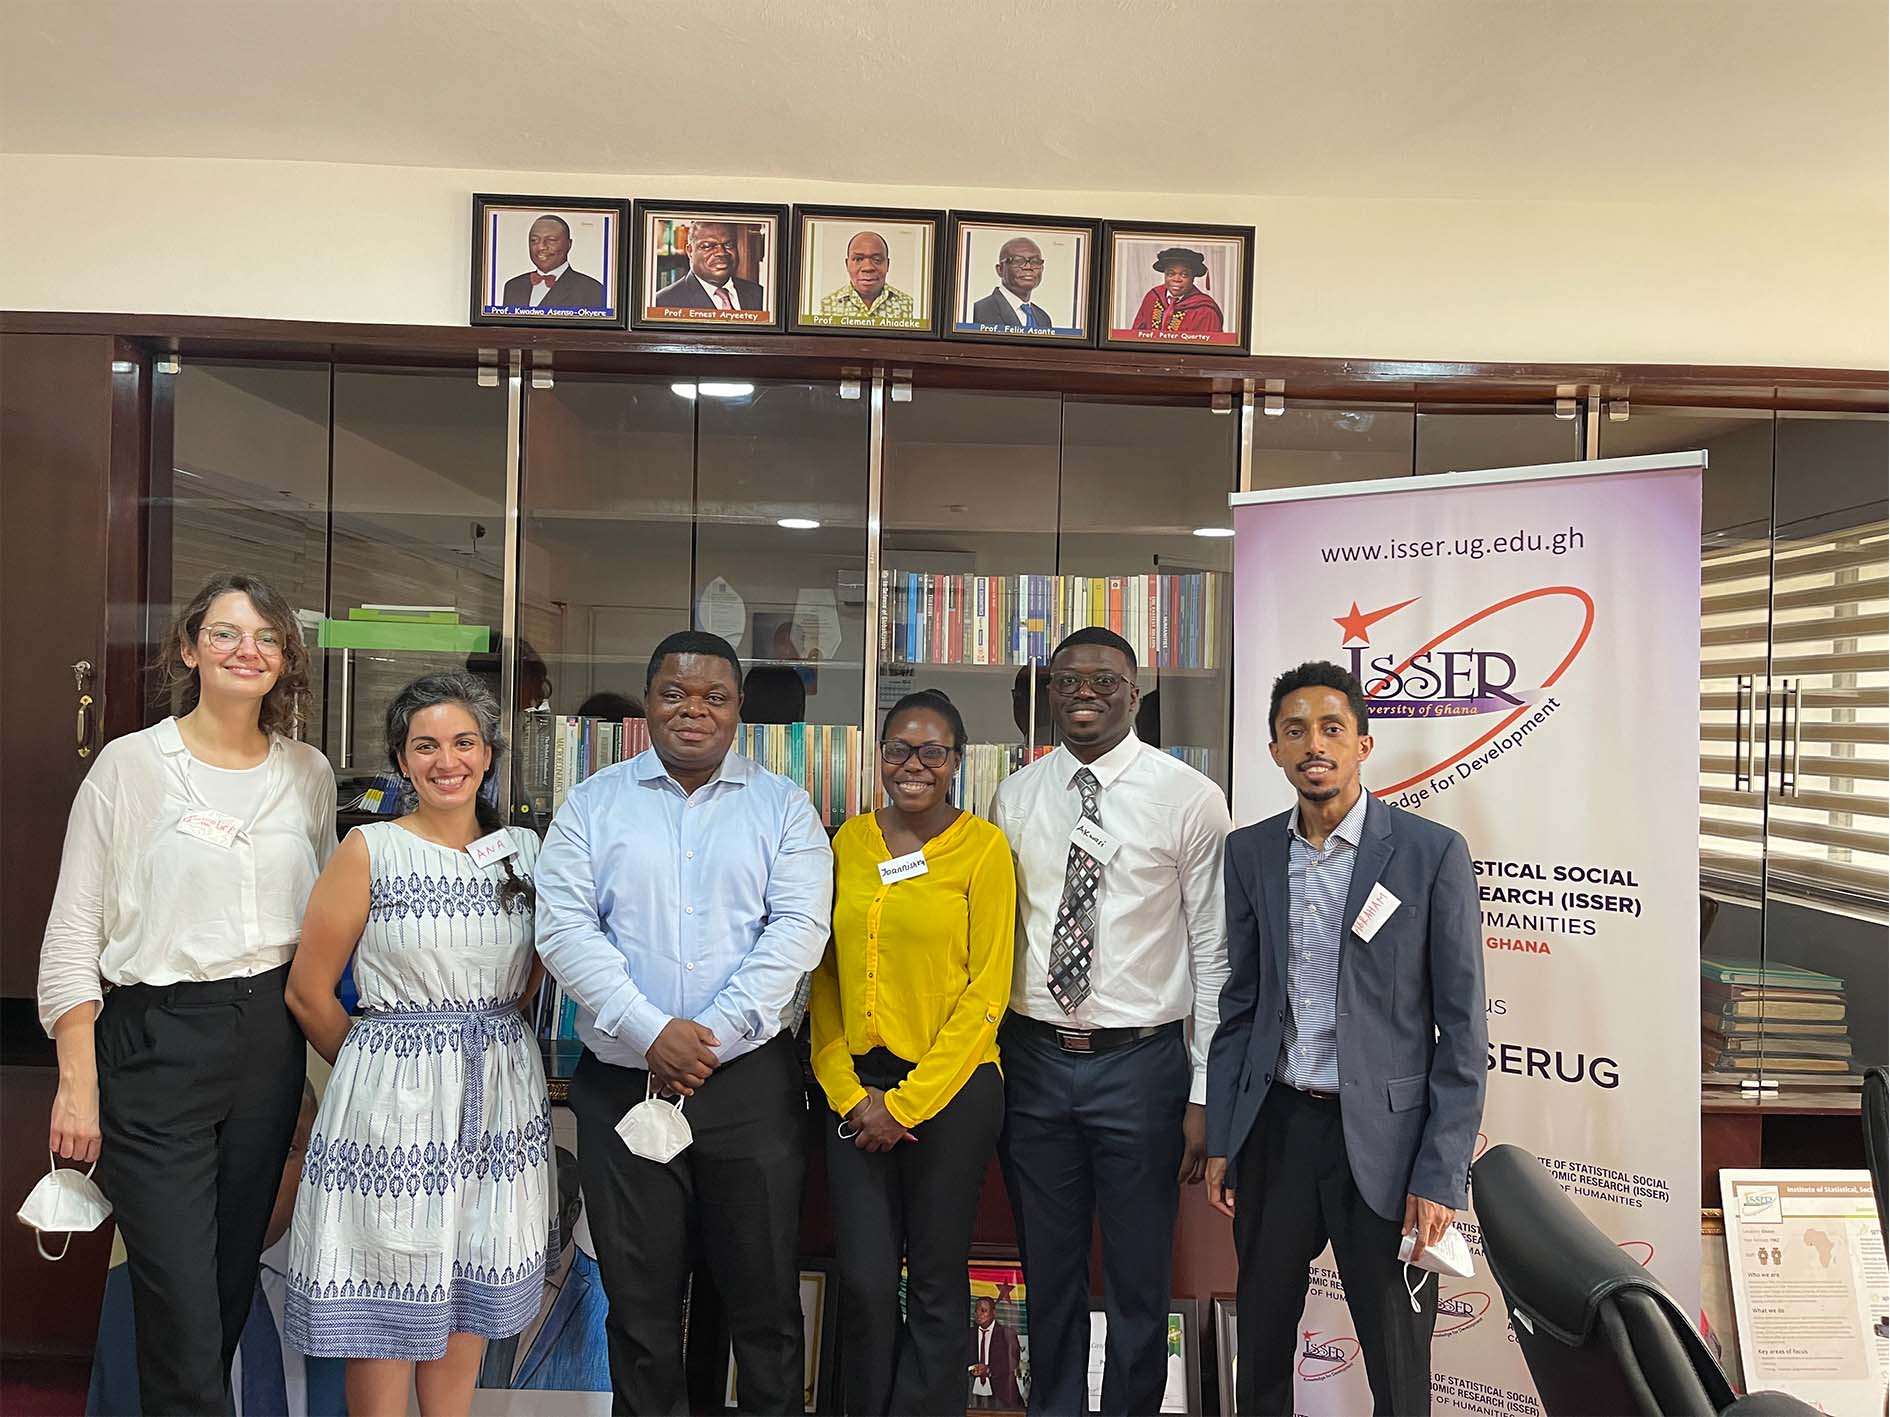 File photo of Prof. Quartey with students of the One Health Programme during their working visit to Ghana in February 2022